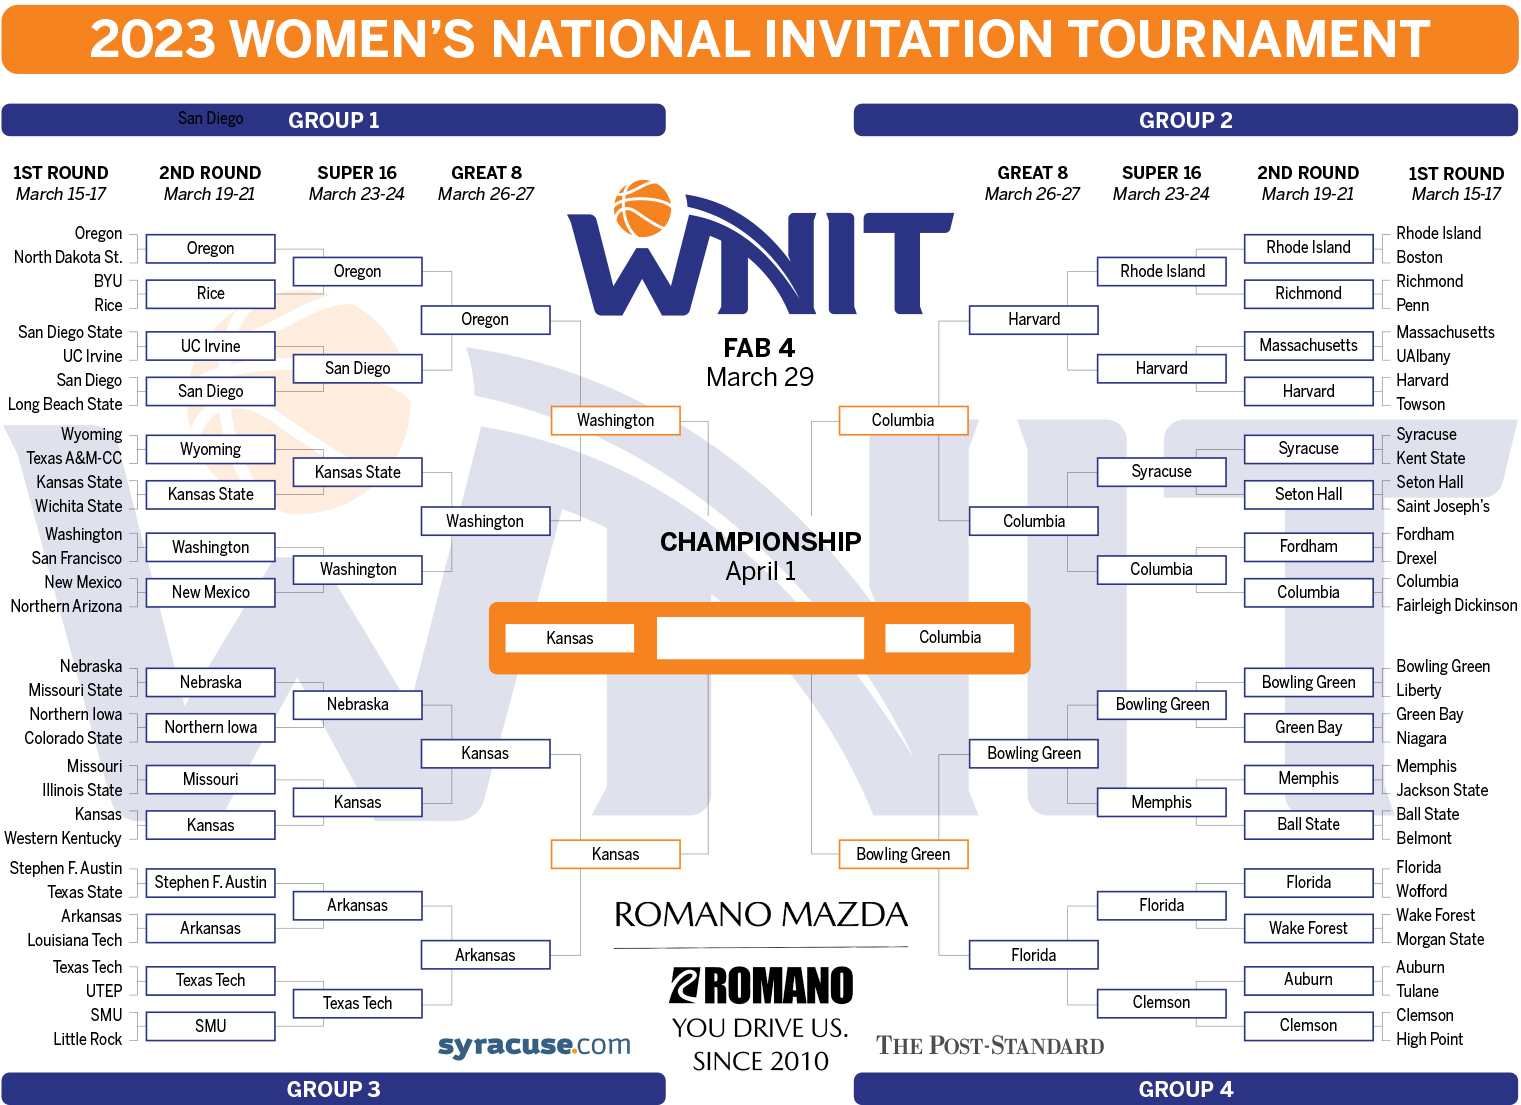 How to watch Columbia vs. Kansas in 2023 WNIT Championship (updated bracket) - syracuse.com